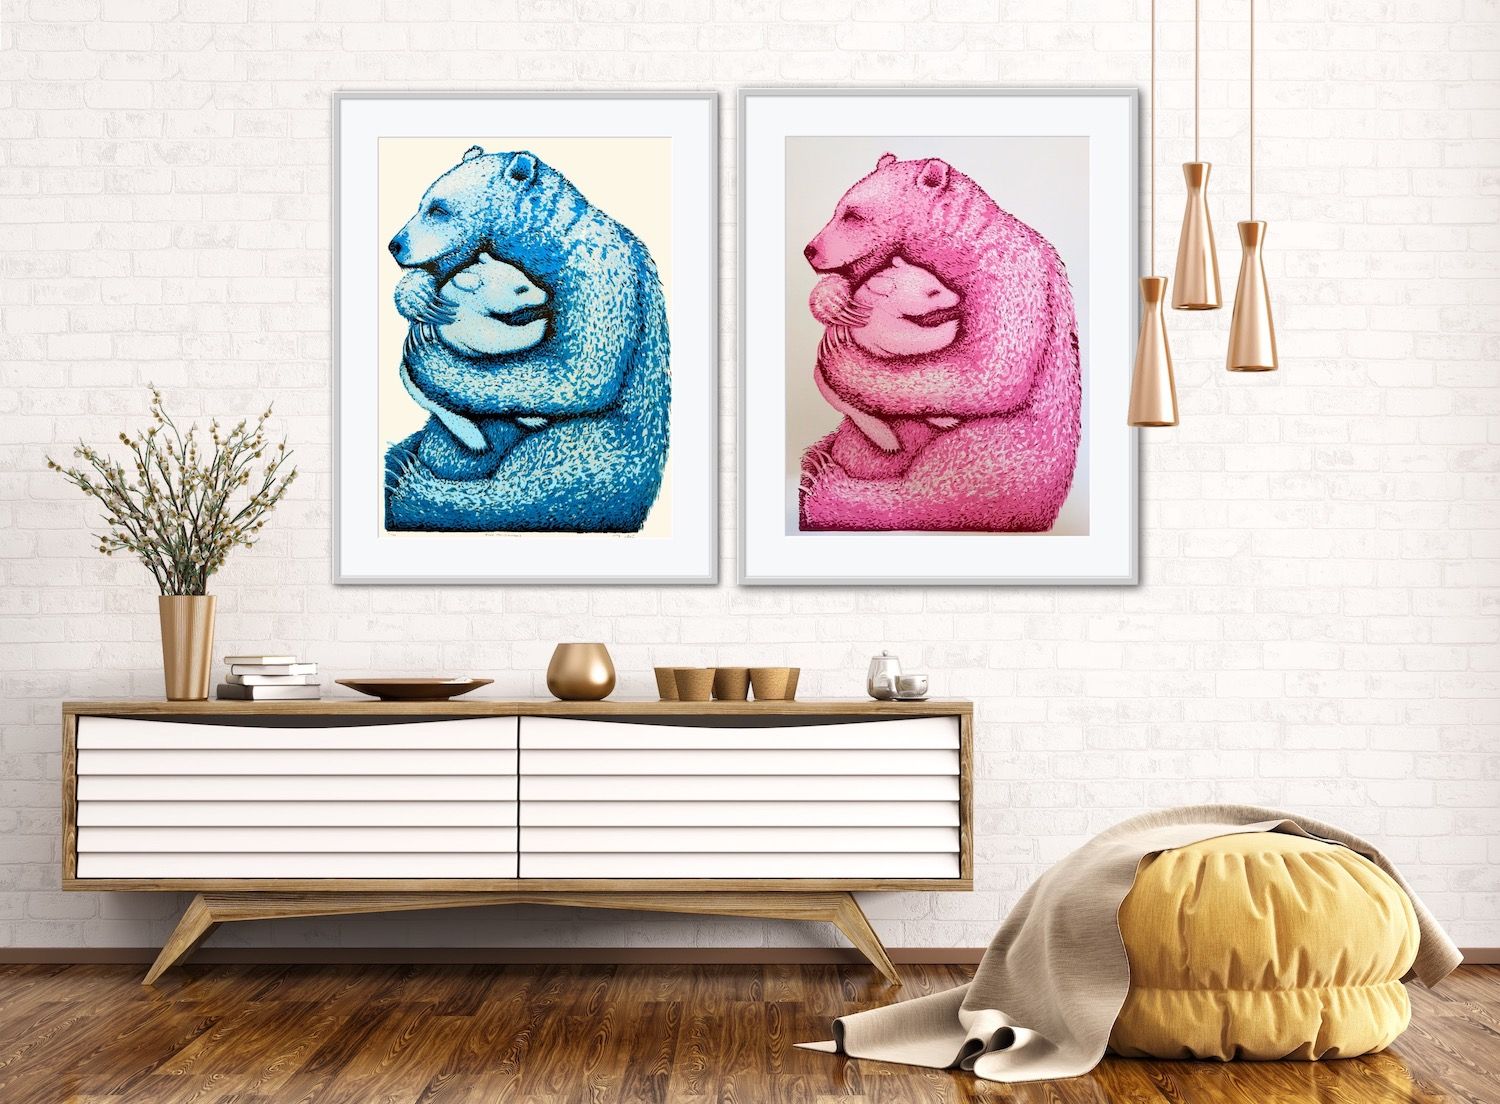 Bear Hugs (Hot Pink and Blue) by Tim Southall - Secondary Image